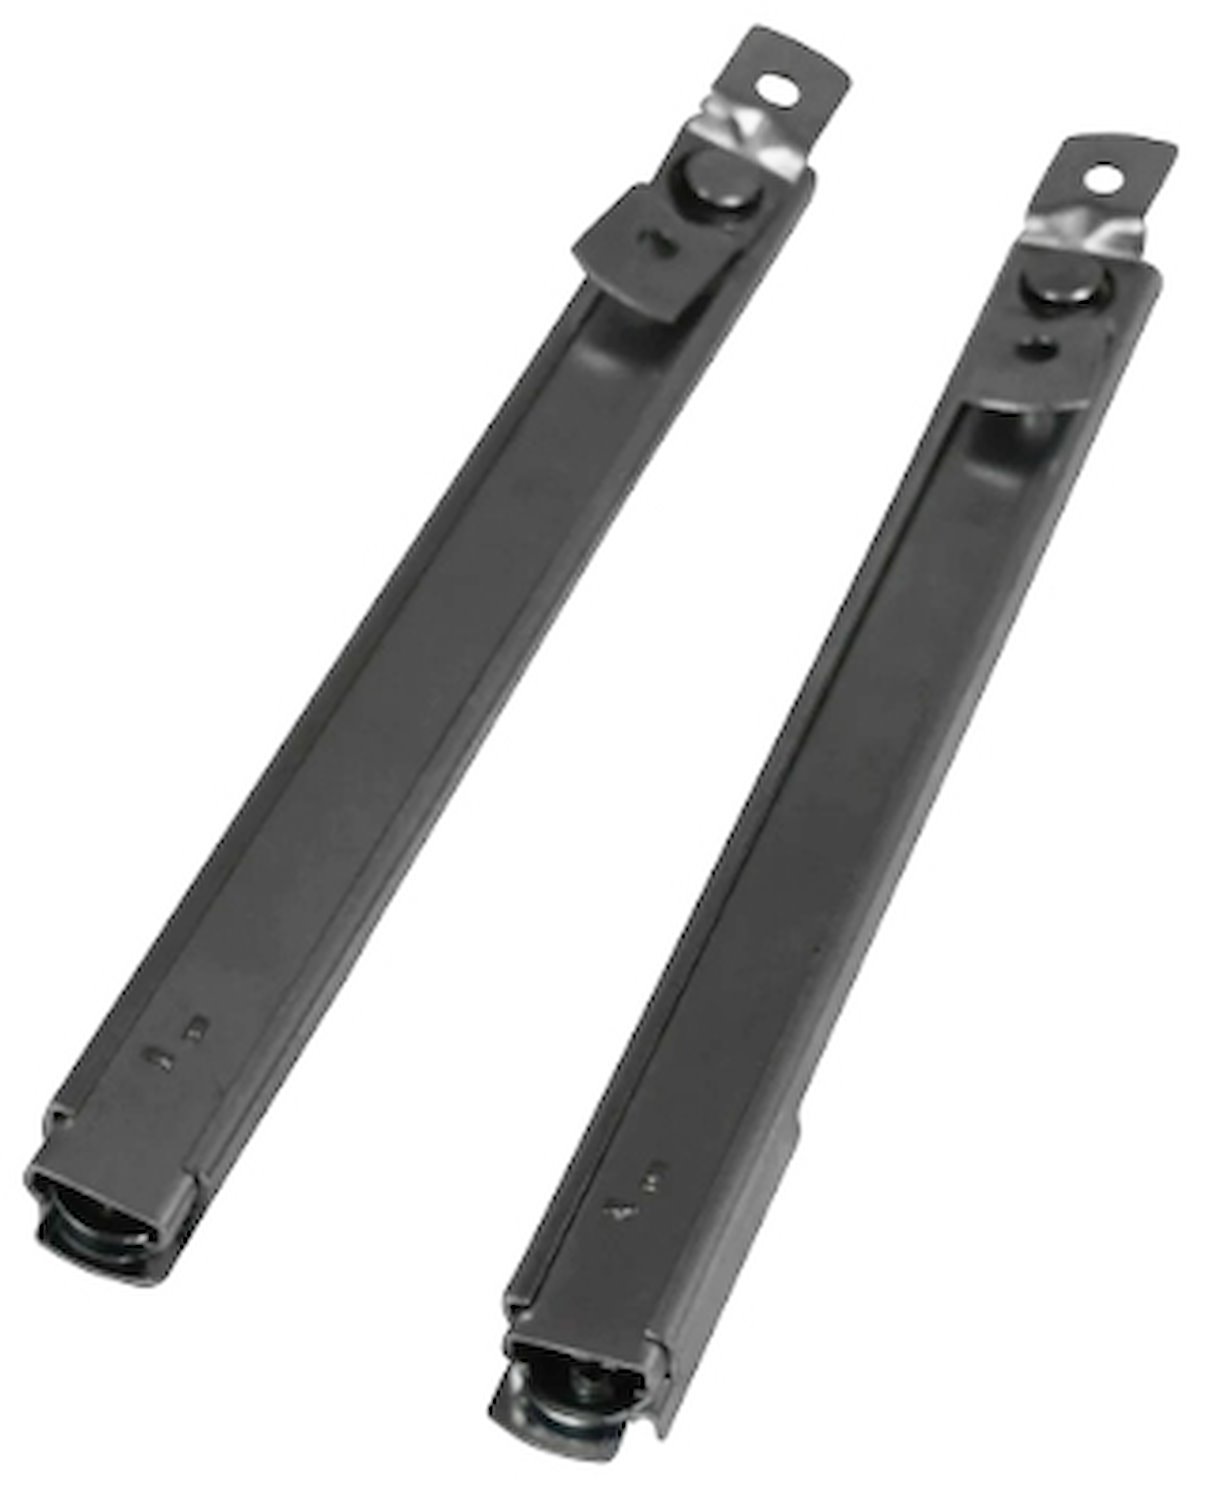 TG07-69SP Rear Liftgate Support for 1969-1972 Chevy Blazer, GMC Jimmy